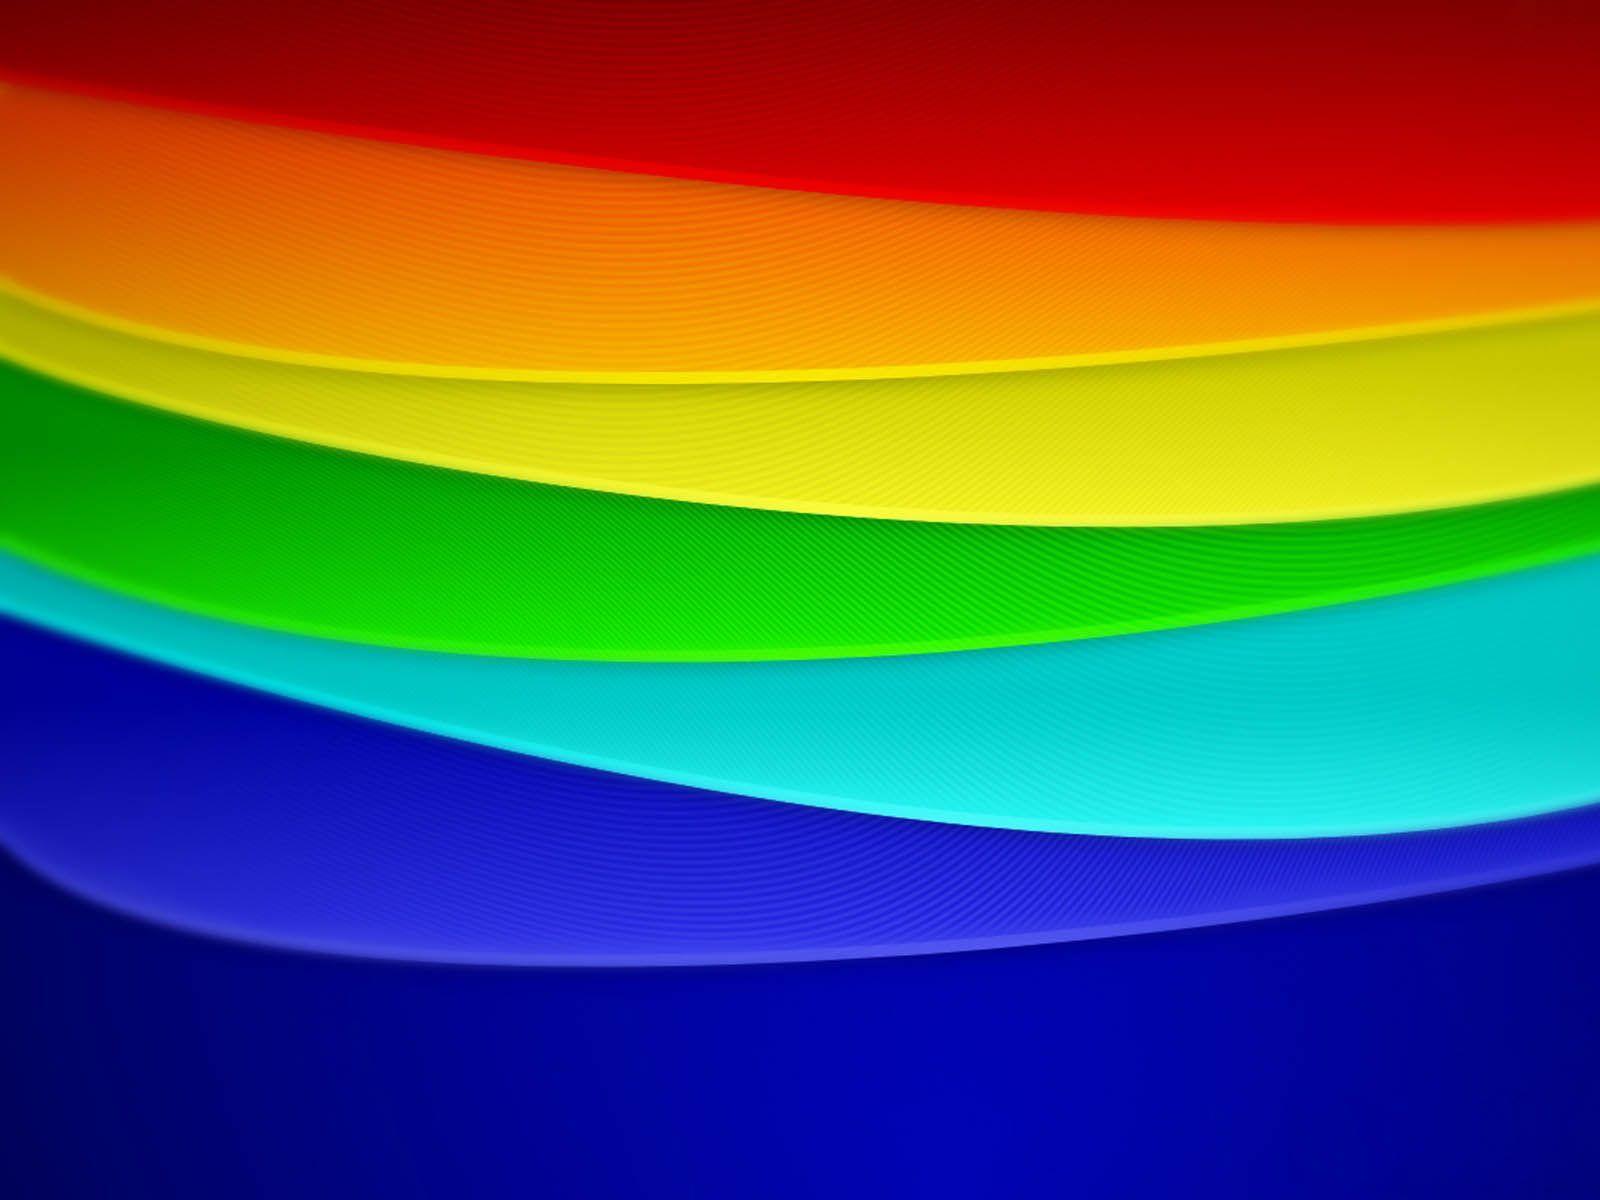 Wallpaper Picture Gallery: Abstract Rainbow Colours Wallpaper